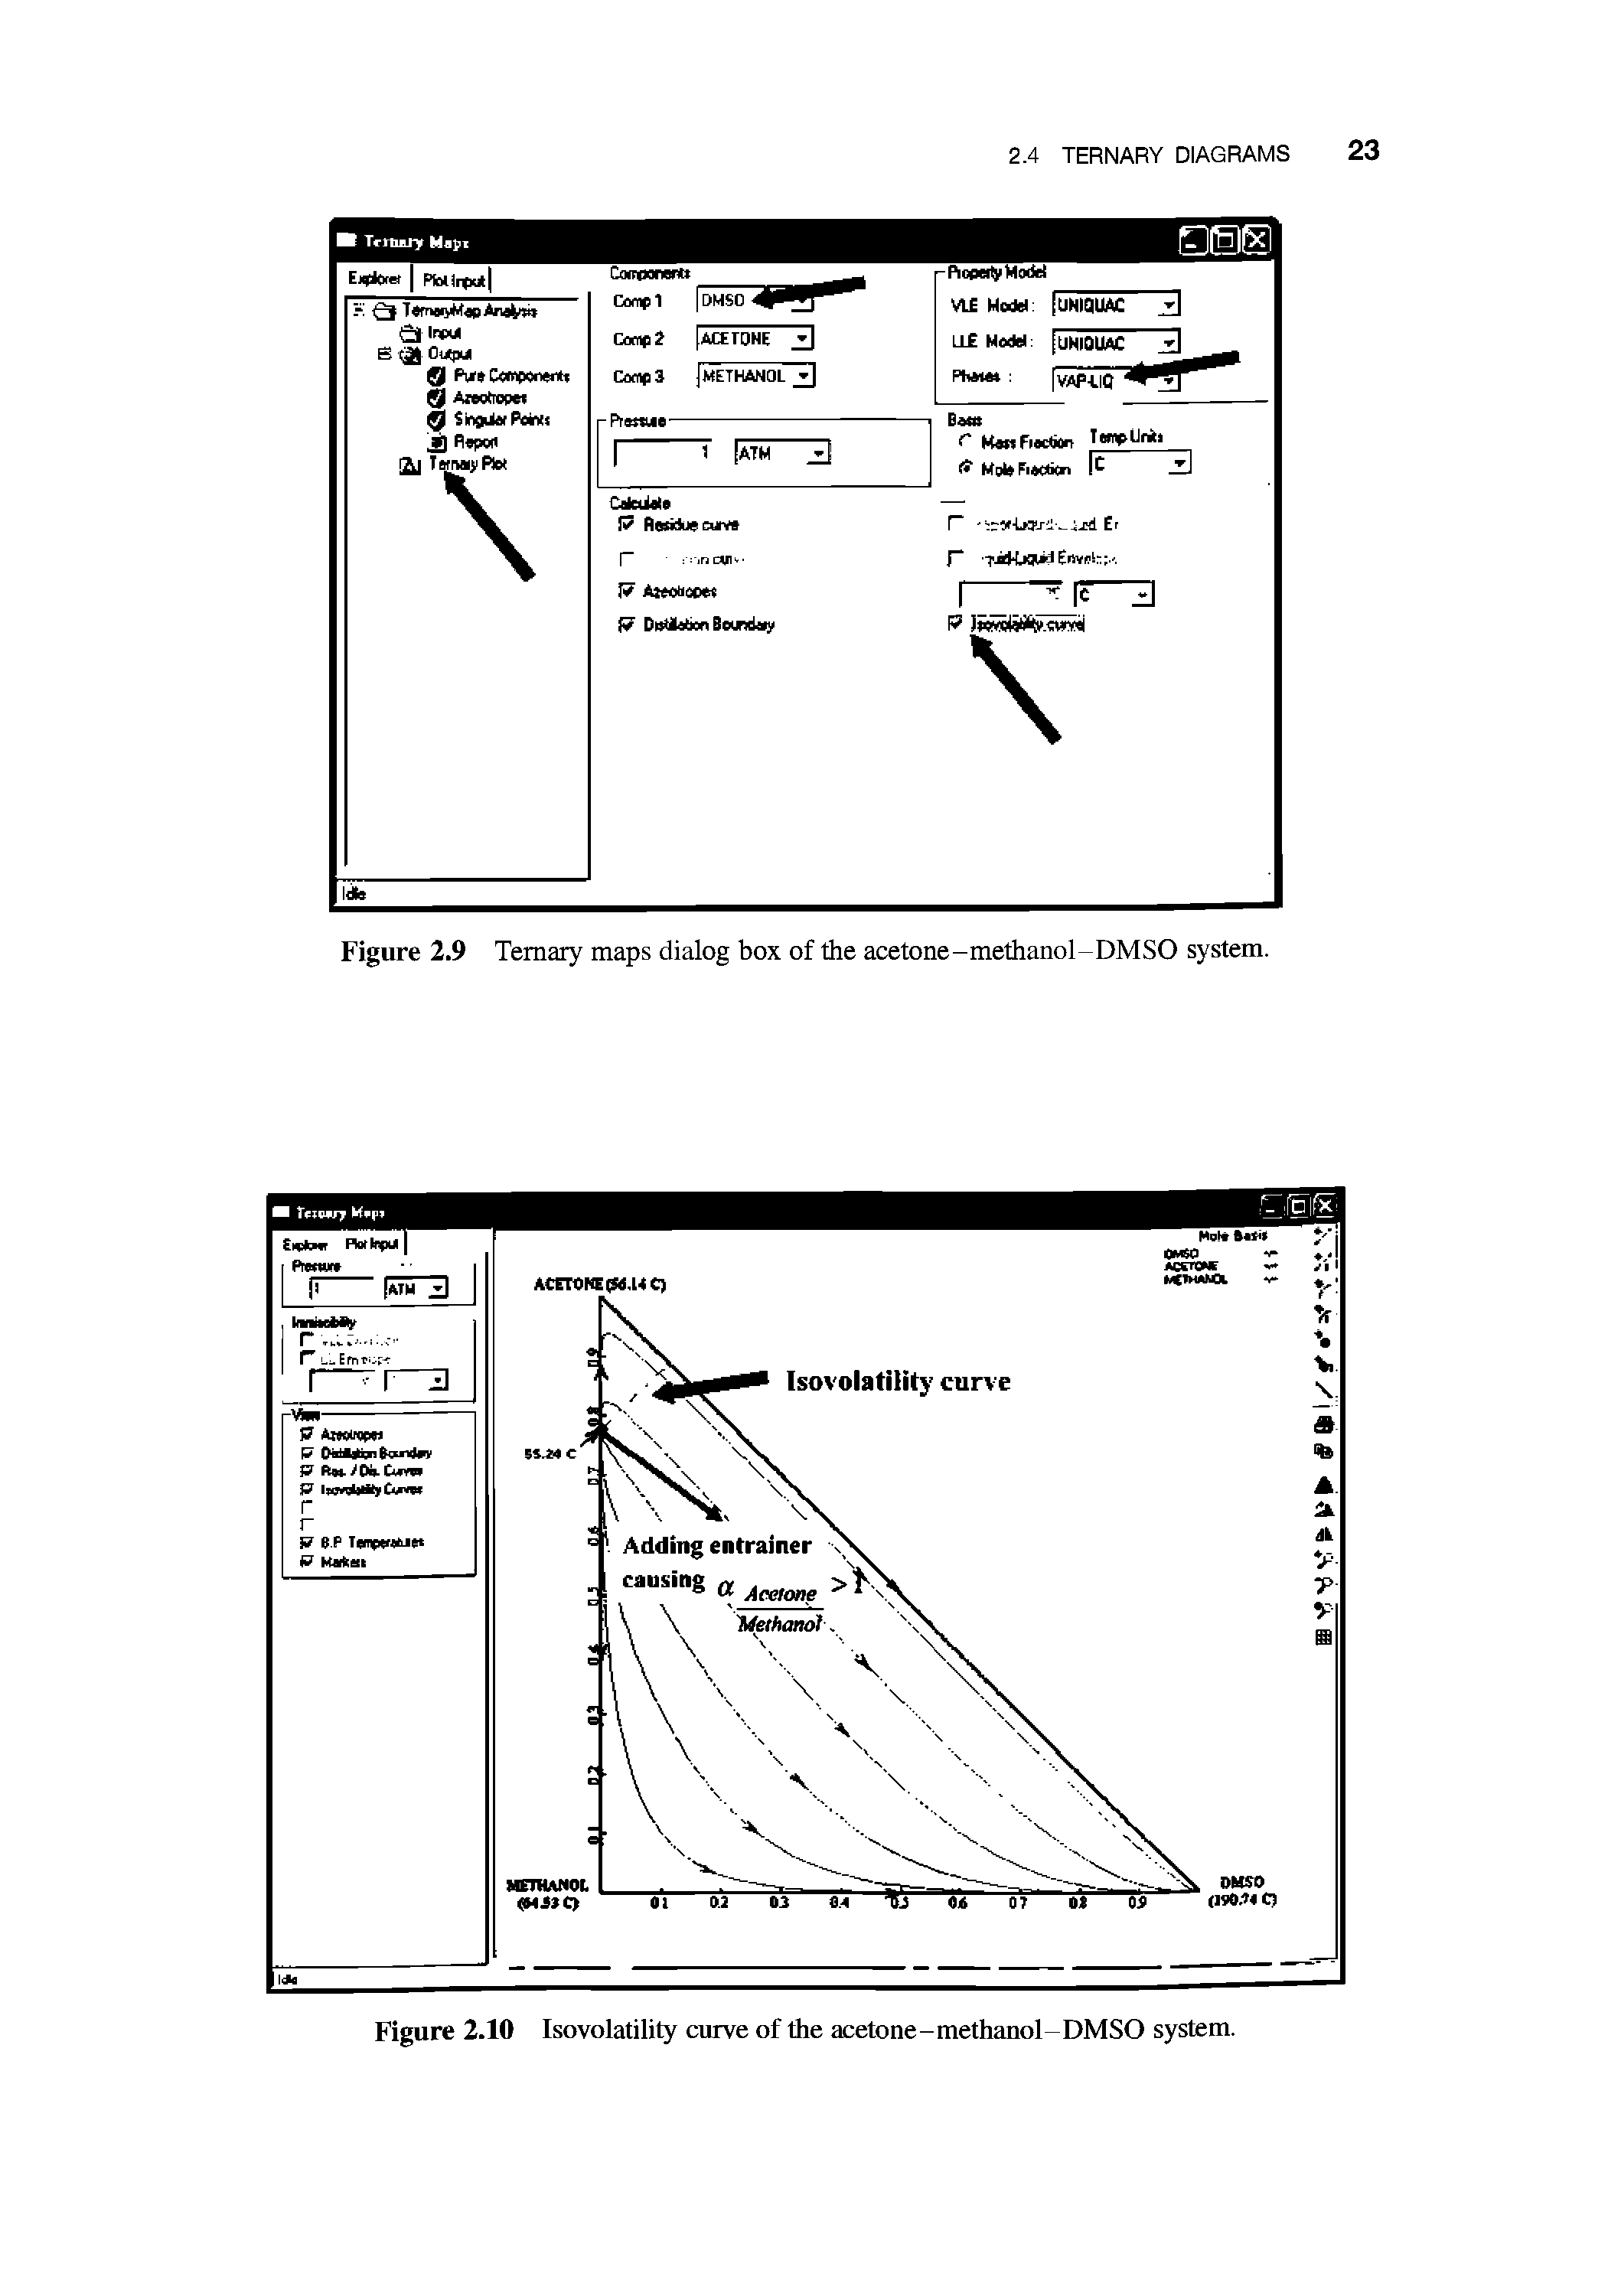 Figure 2.10 Isovolatility curve of the acetone-methanol-DMSO system.